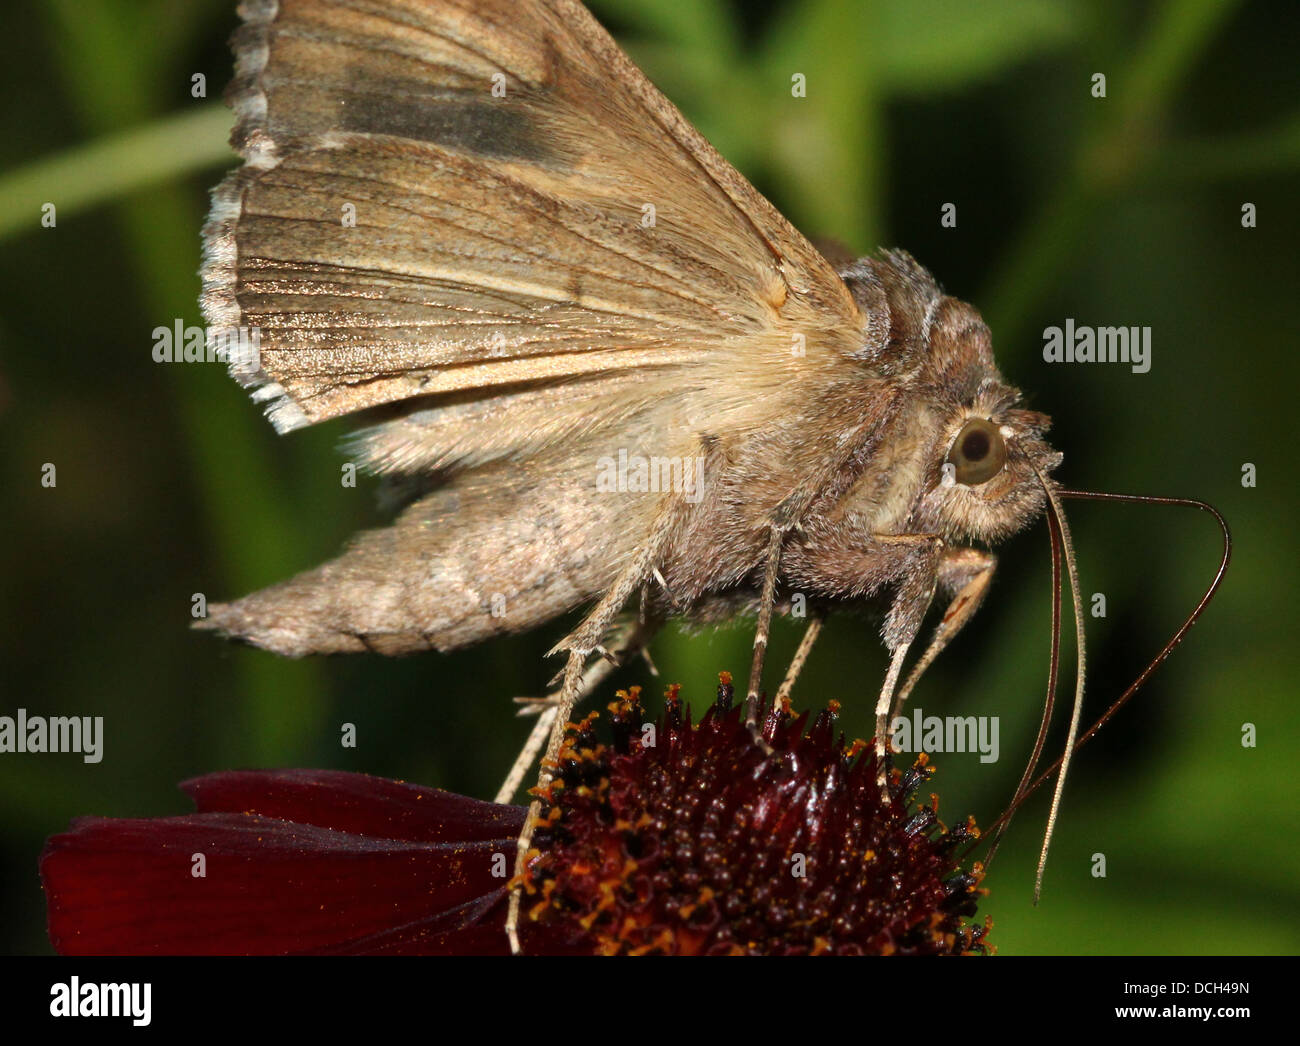 Silver Y (Autographa gamma) Moth on an impressive array of more than 15 different colourful flowers  (100+ images in series) Stock Photo